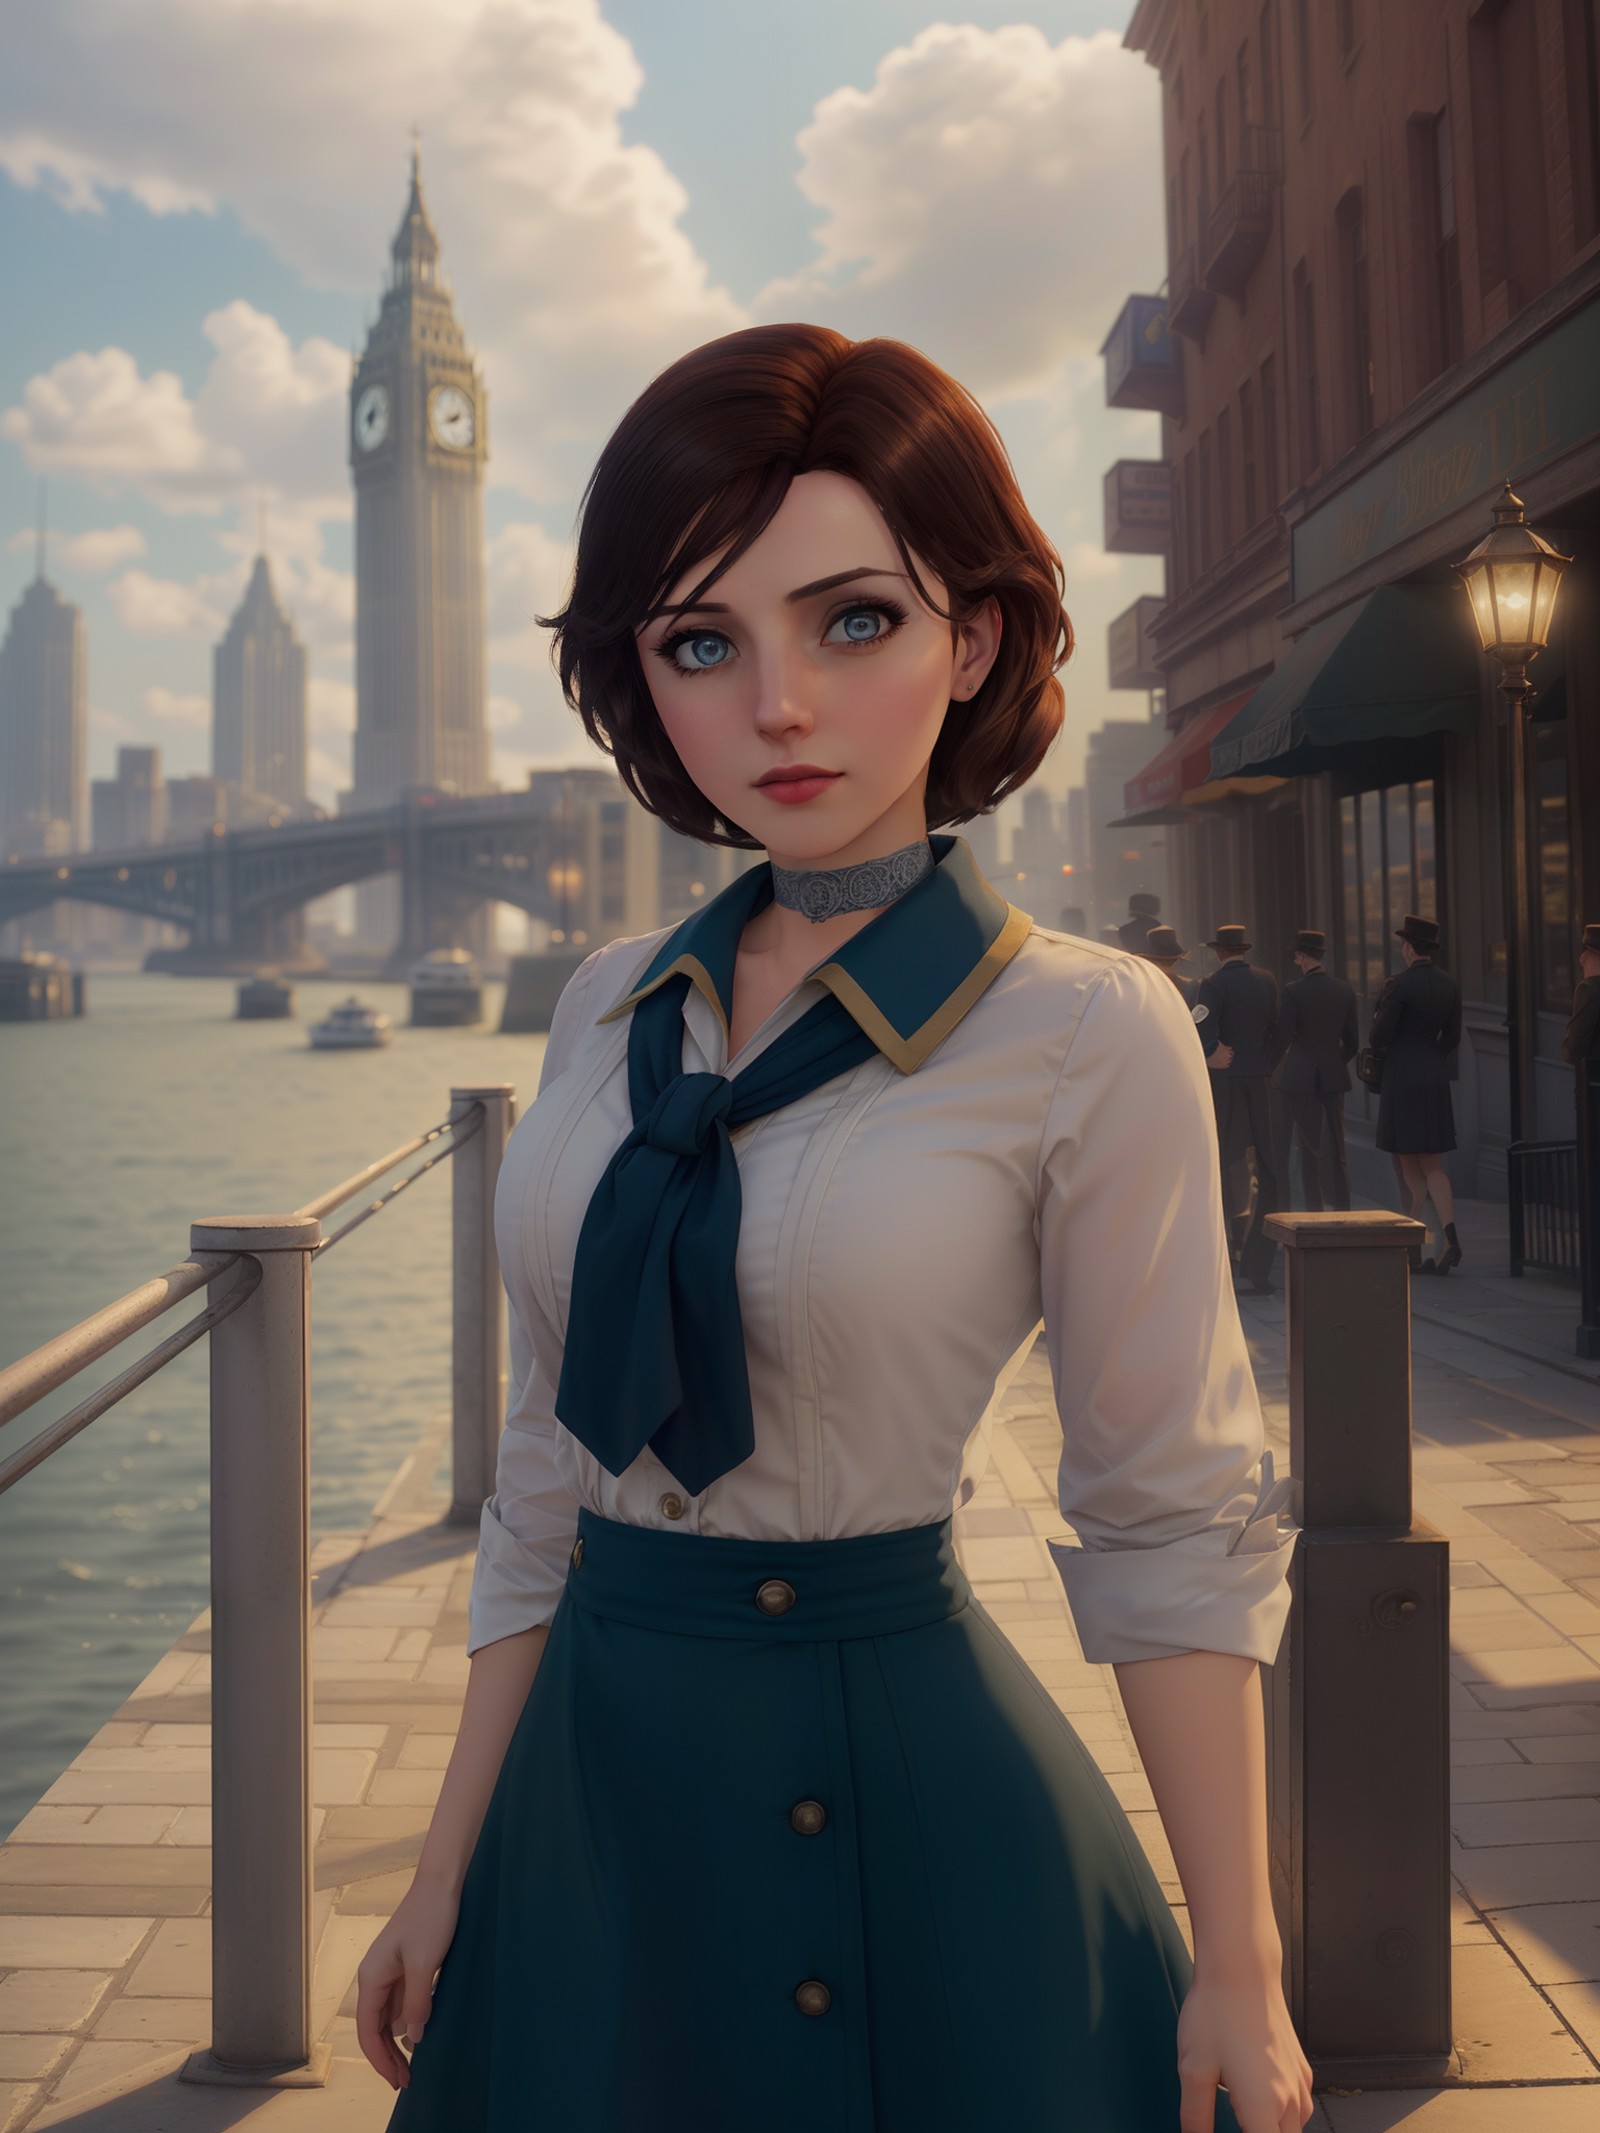 bioshockelizabeth standing in front of a city, cute face, dramatic lighting, bright weather, wallpaper, intricate, sharp f...